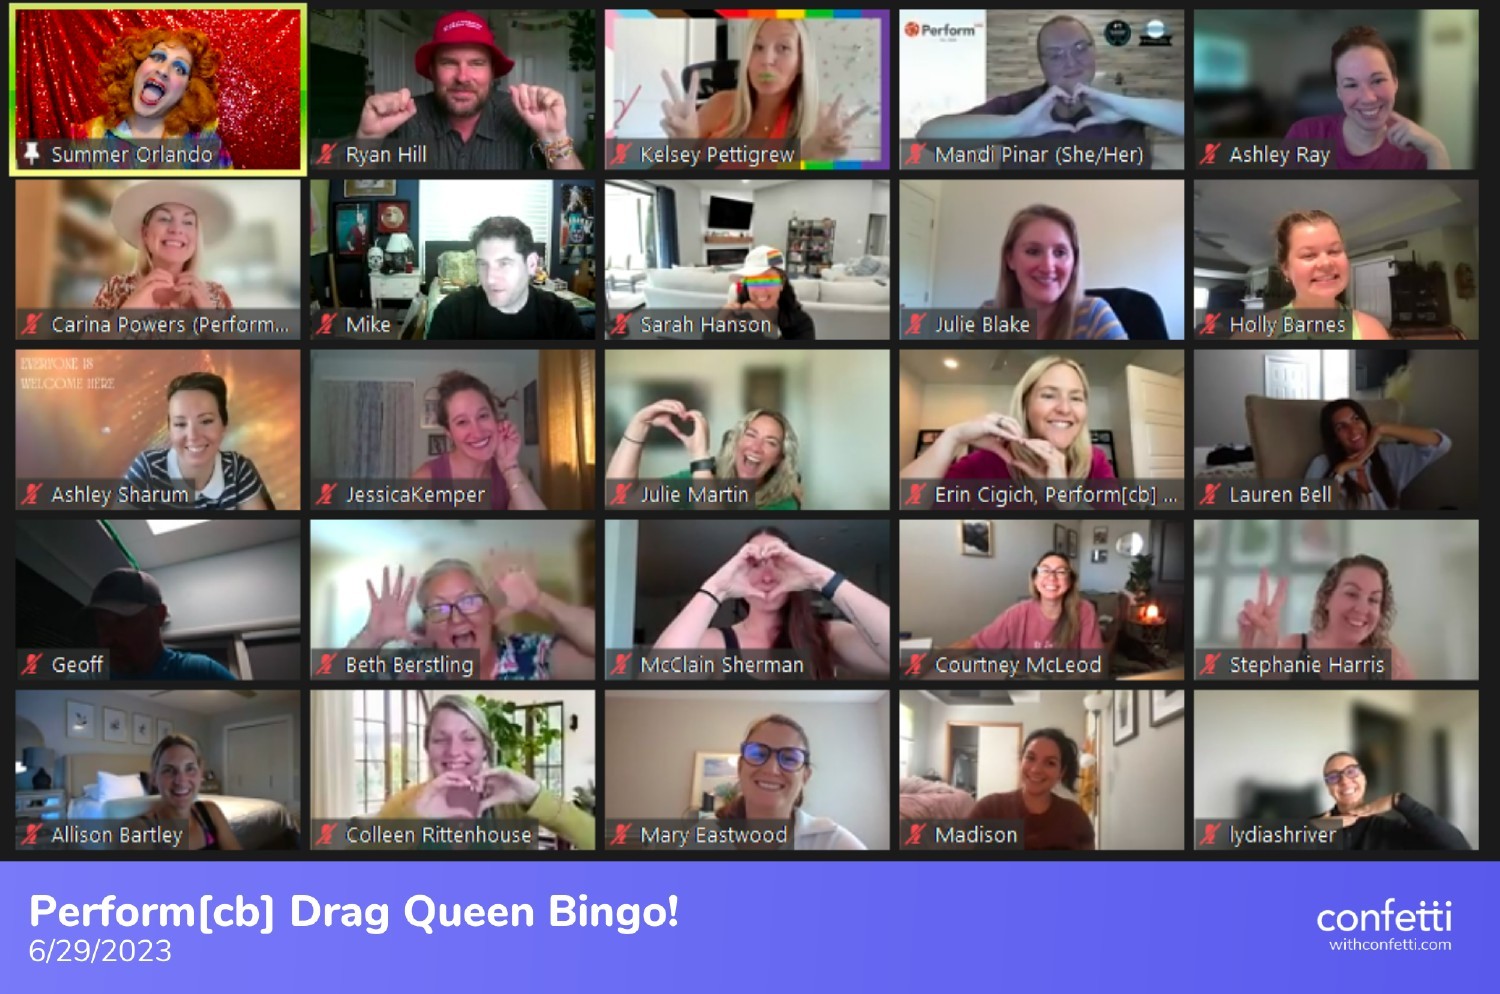 Celebrating Pride Month virtually with our annual Drag Queen Bingo featuring fantastic performances and prizes!